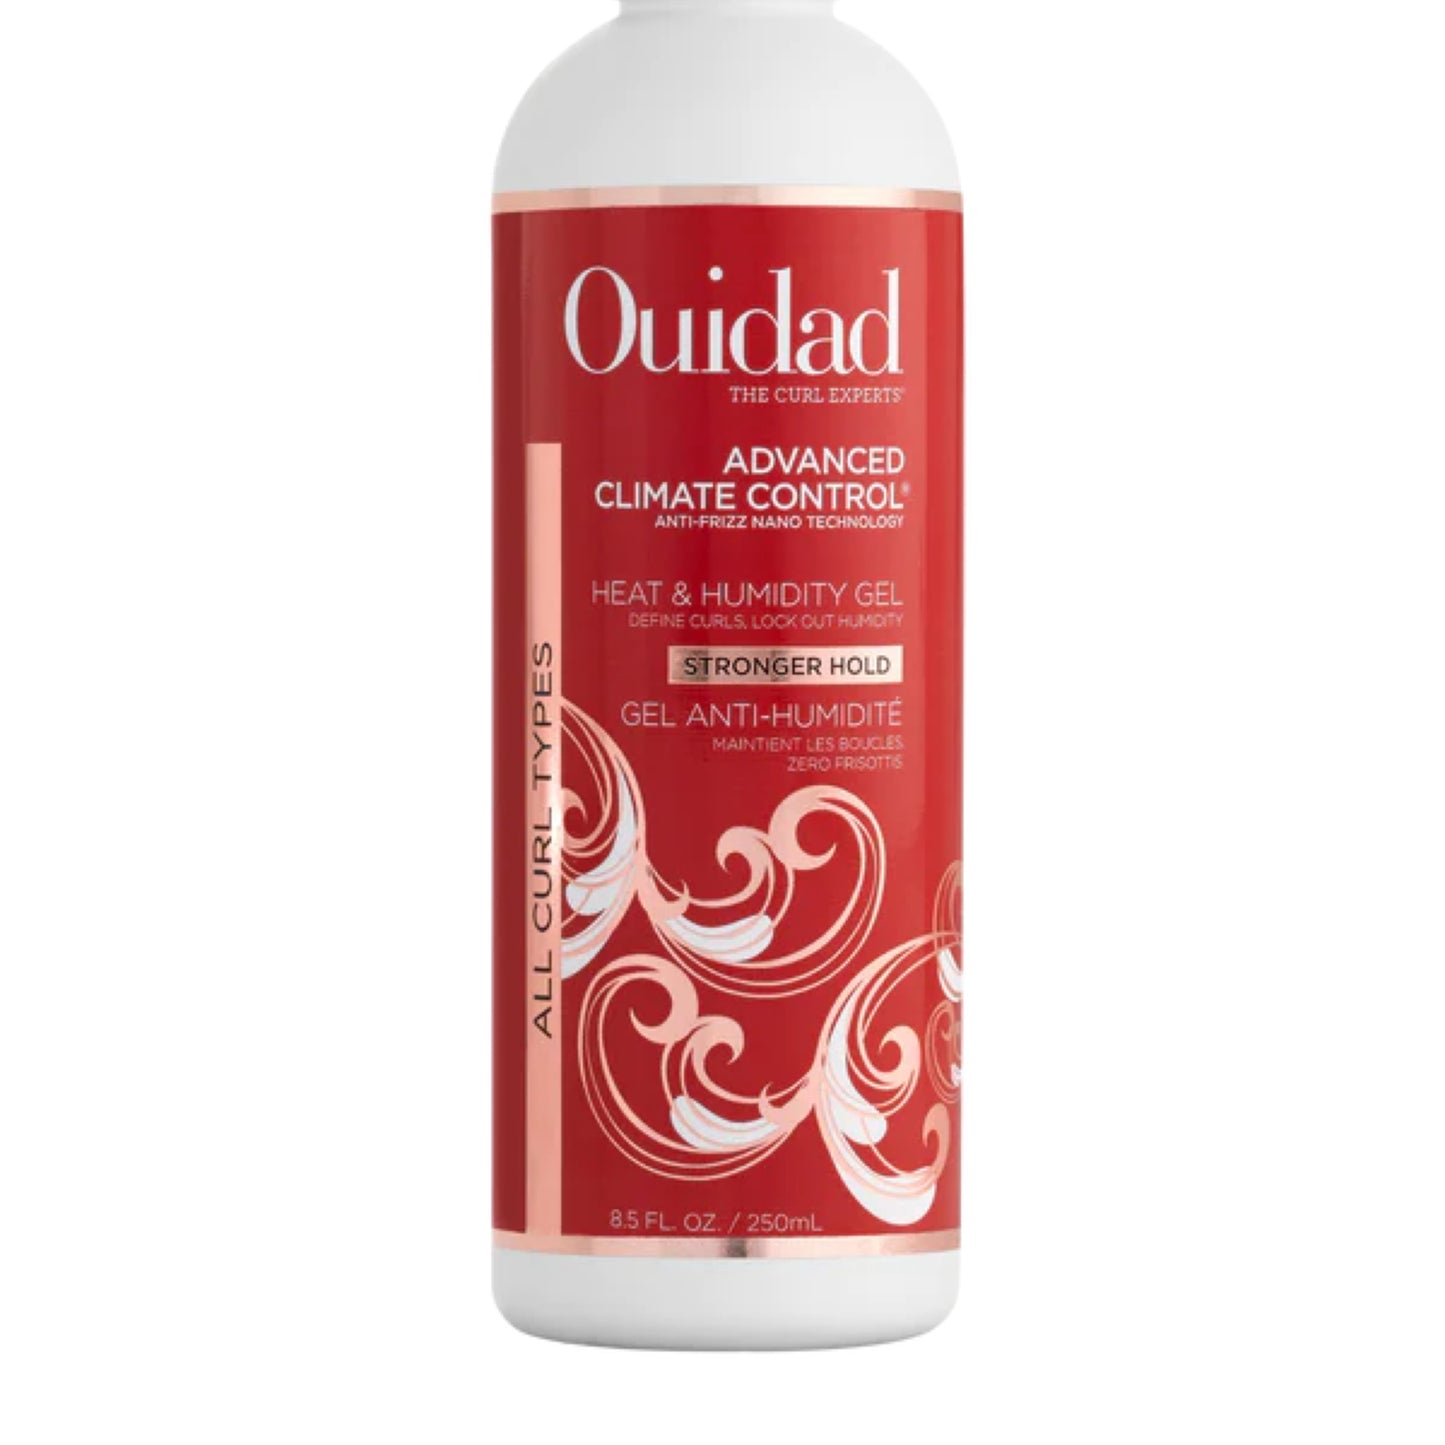 Ouidad | Advanced Climate Control: Stronger Hold